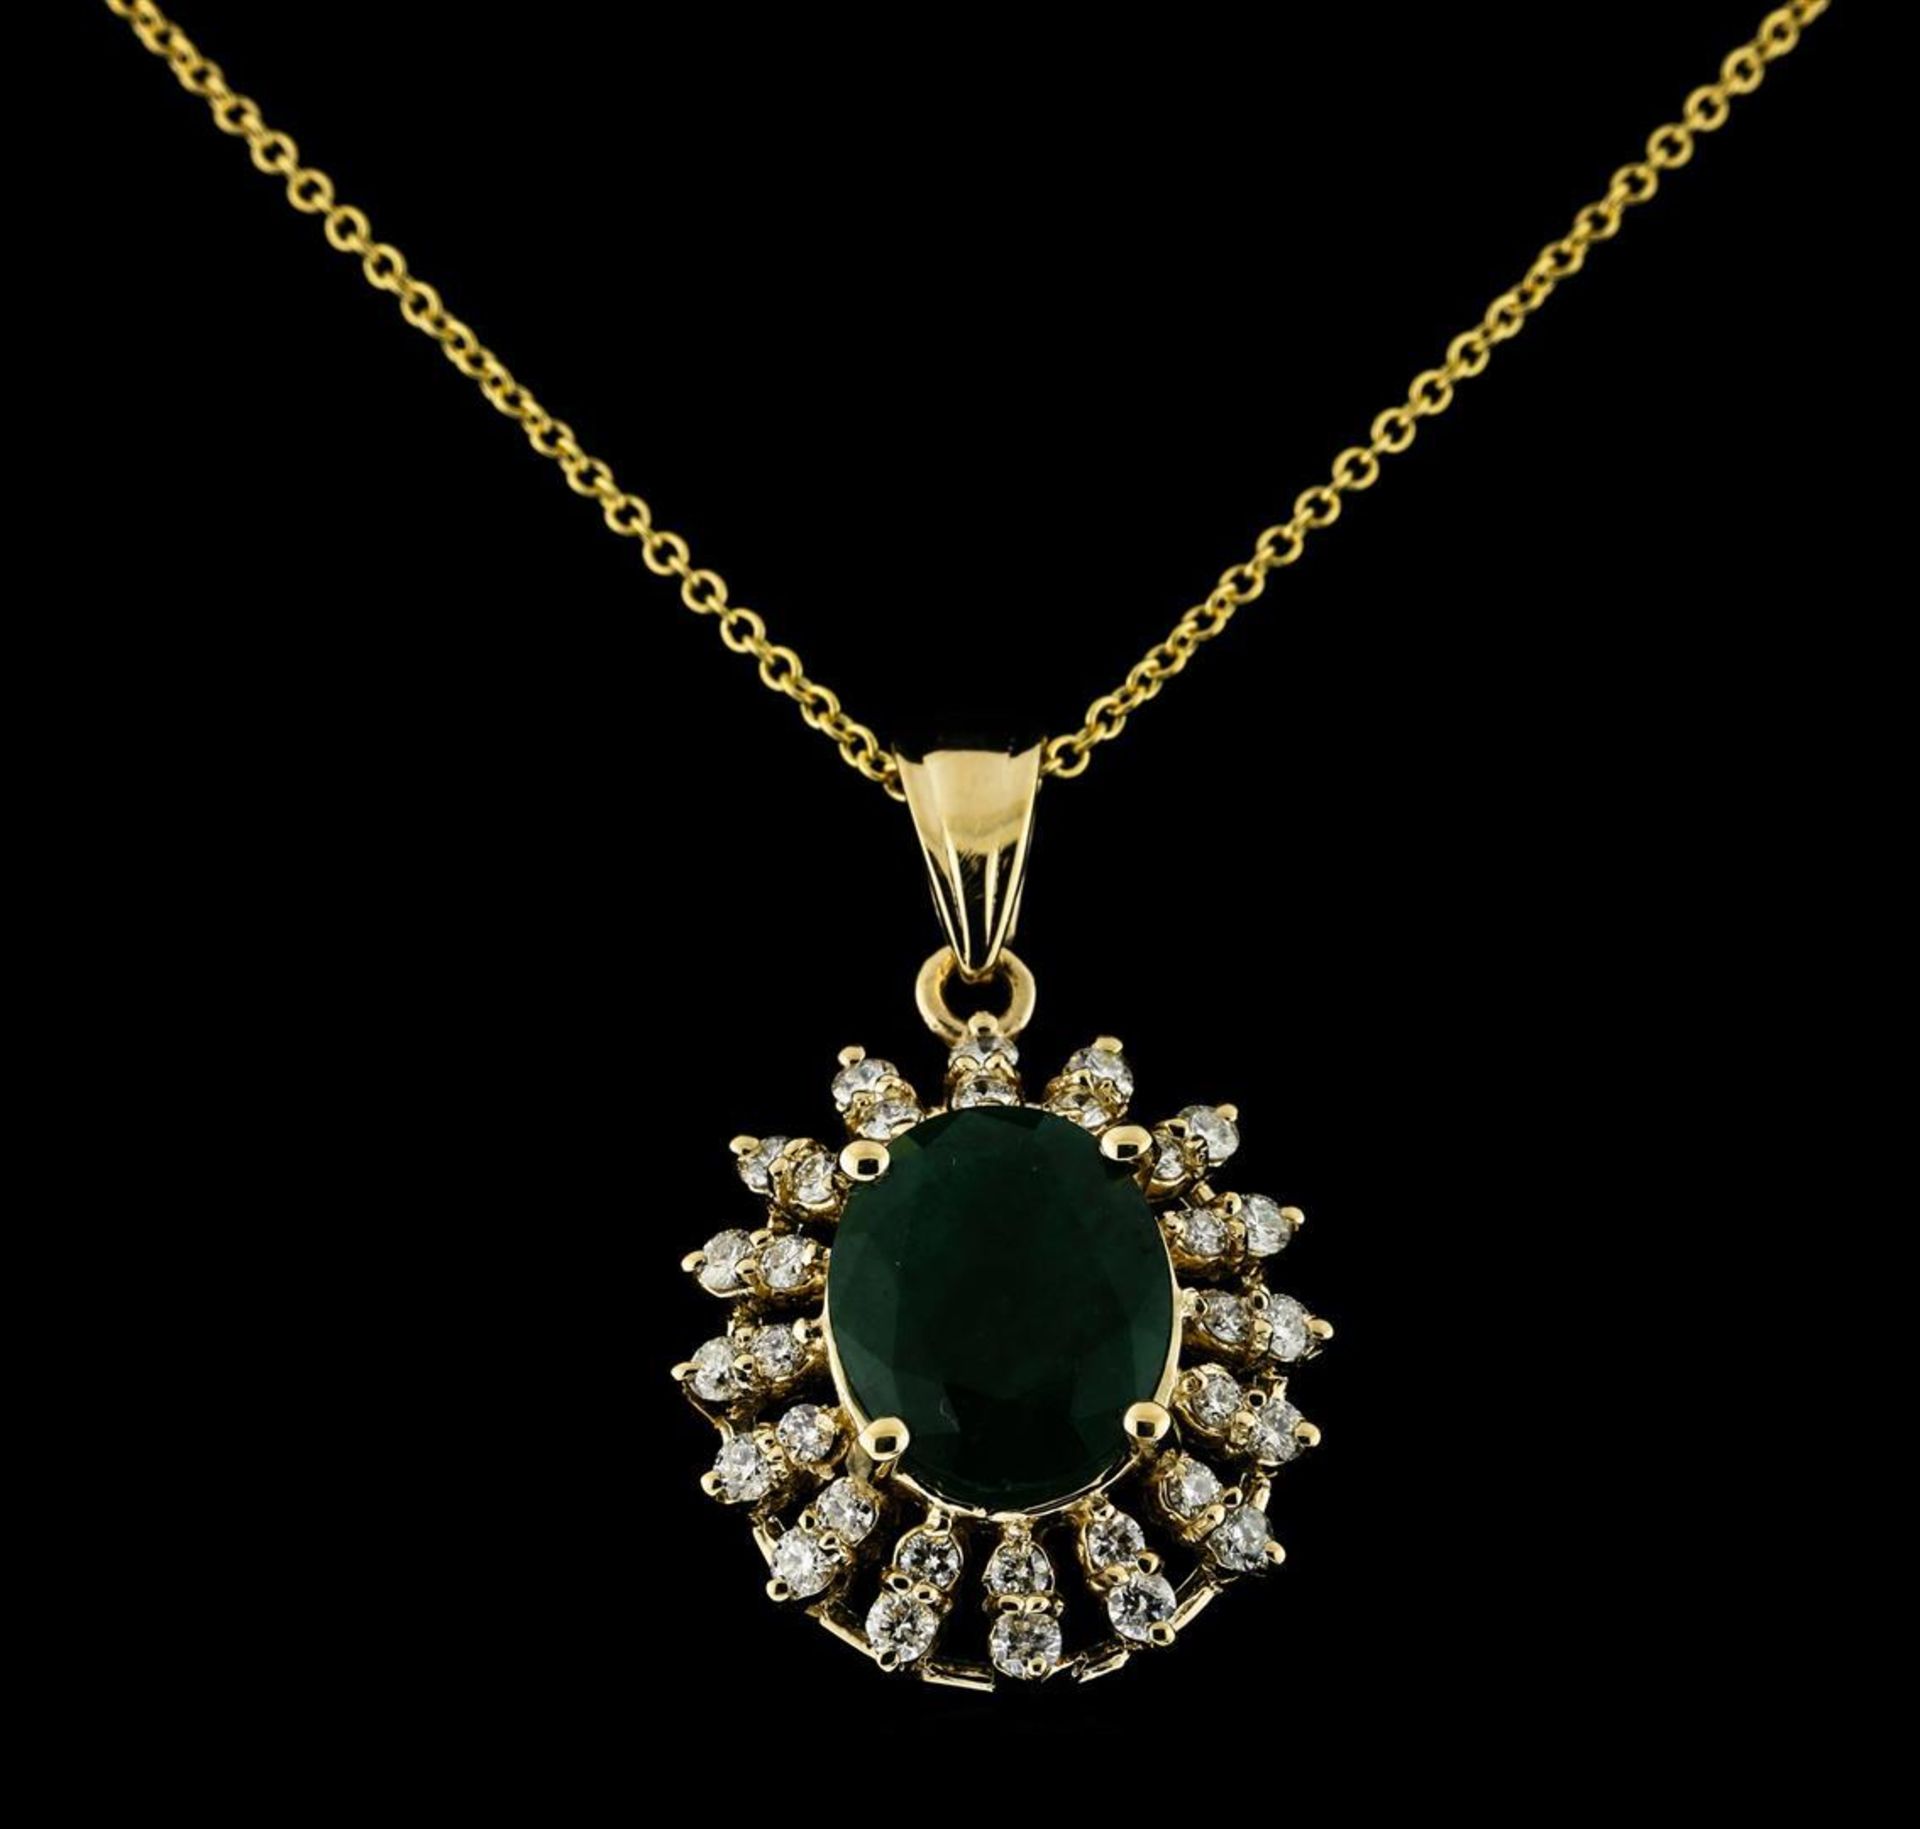 3.20 ctw Emerald and Diamond Pendant With Chain - 14KT Yellow Gold - Image 2 of 3